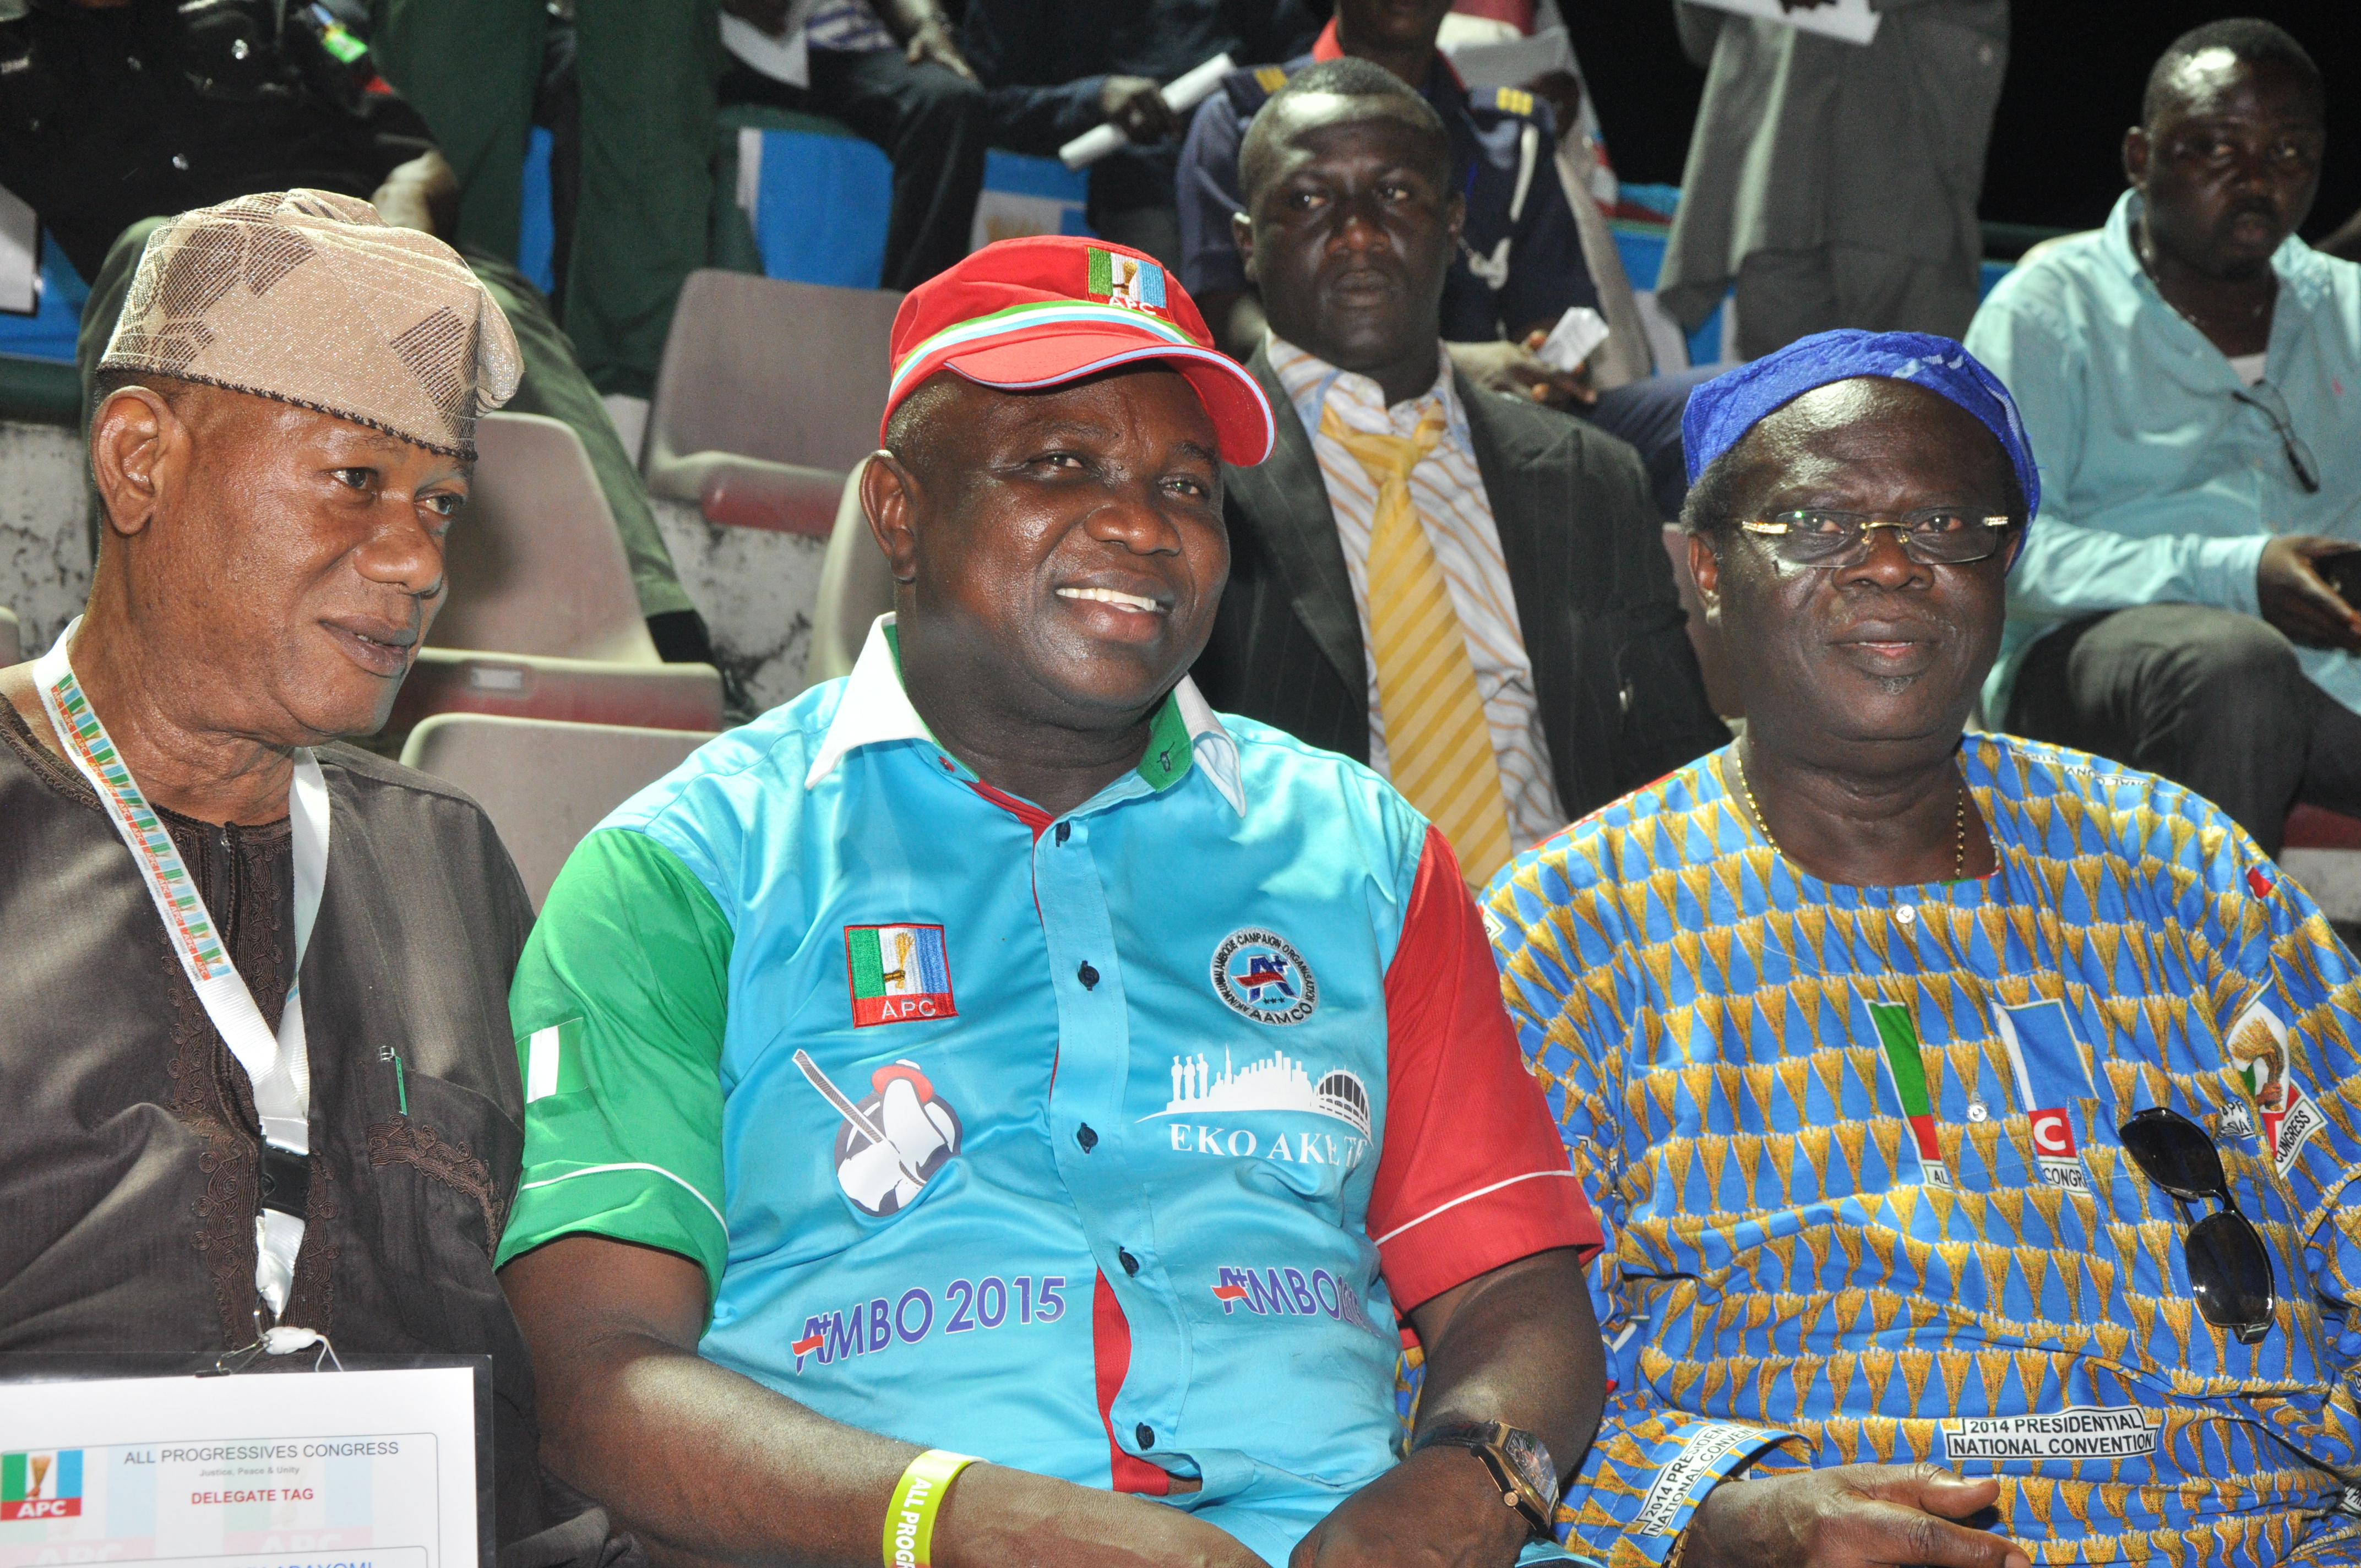 All Progressives Congress (APC) State Leader in Lagos State, Alhaji Badmus Abayomi, APC Governorship candidate for Lagos State, Akinwunmi Ambode and Deputy State Chairman APC Lagos State, Cardinal James Omolaja Odunmbaku at the 3rd National Convention Presidential Primary of the Party in Lagos.